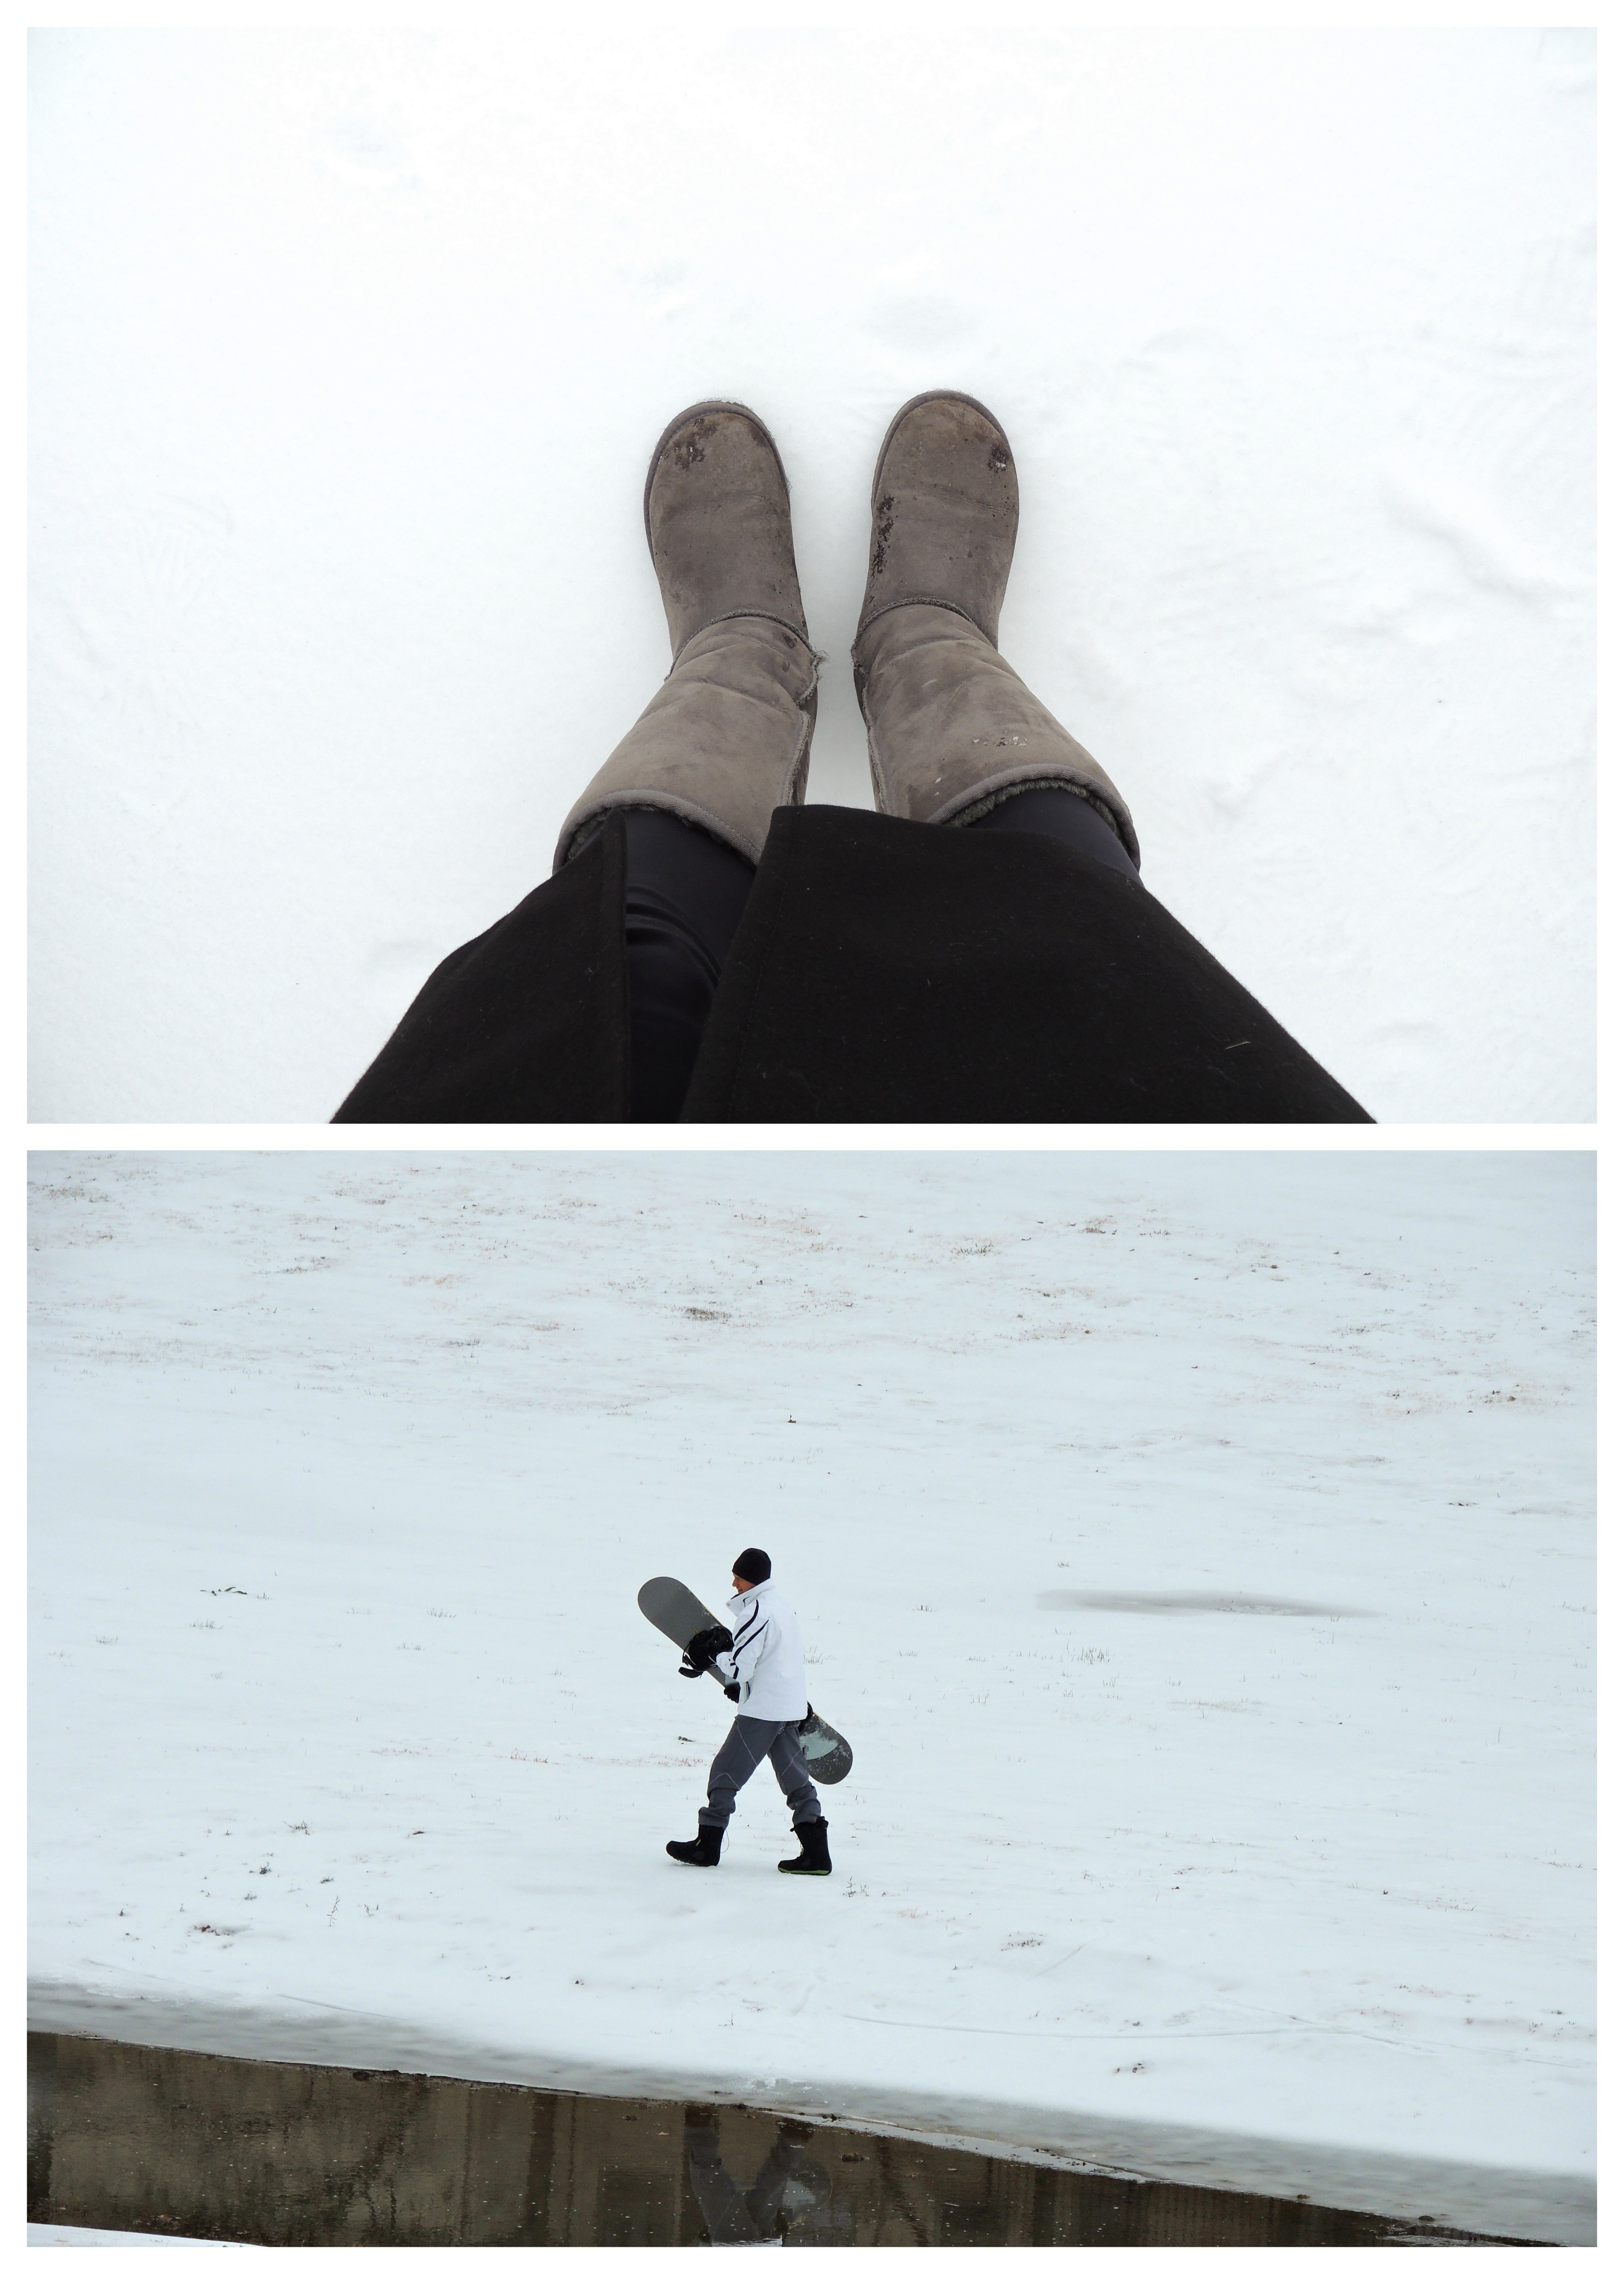 {yes, our neighbor snowboarded down our baby texas hills}